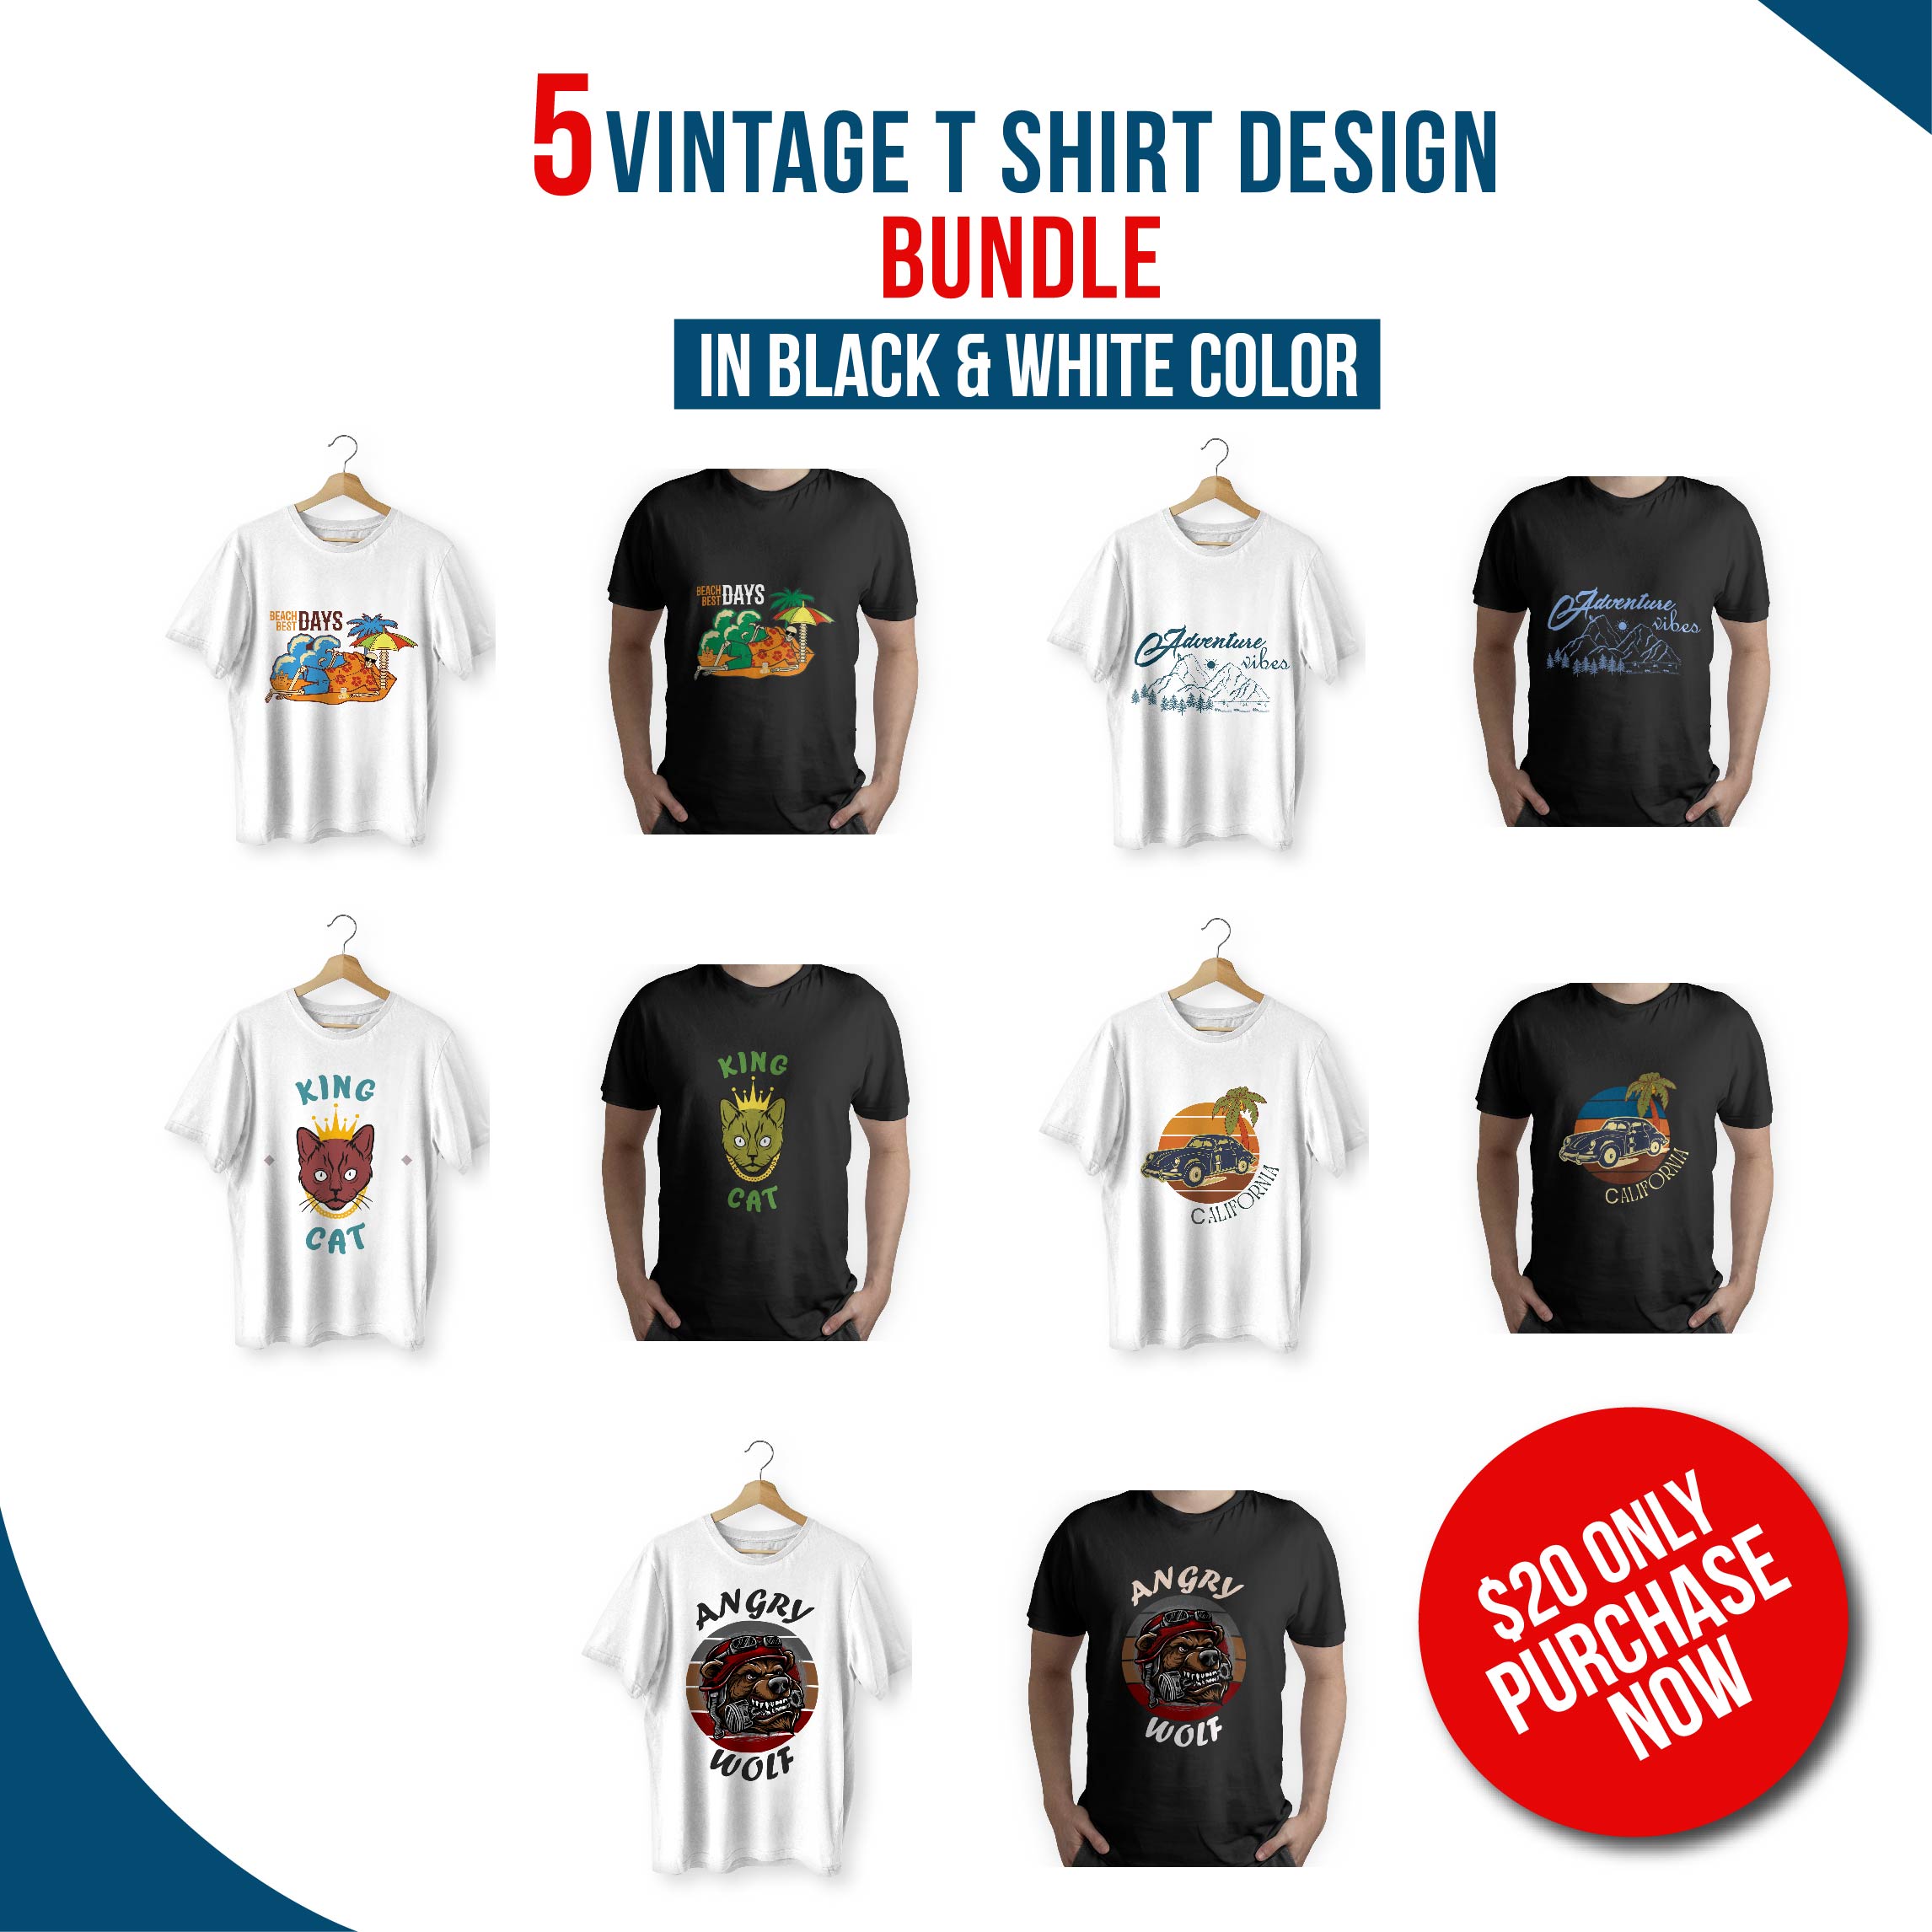 5 Vintage T-Shirt's Design Collection in Just $20 cover image.